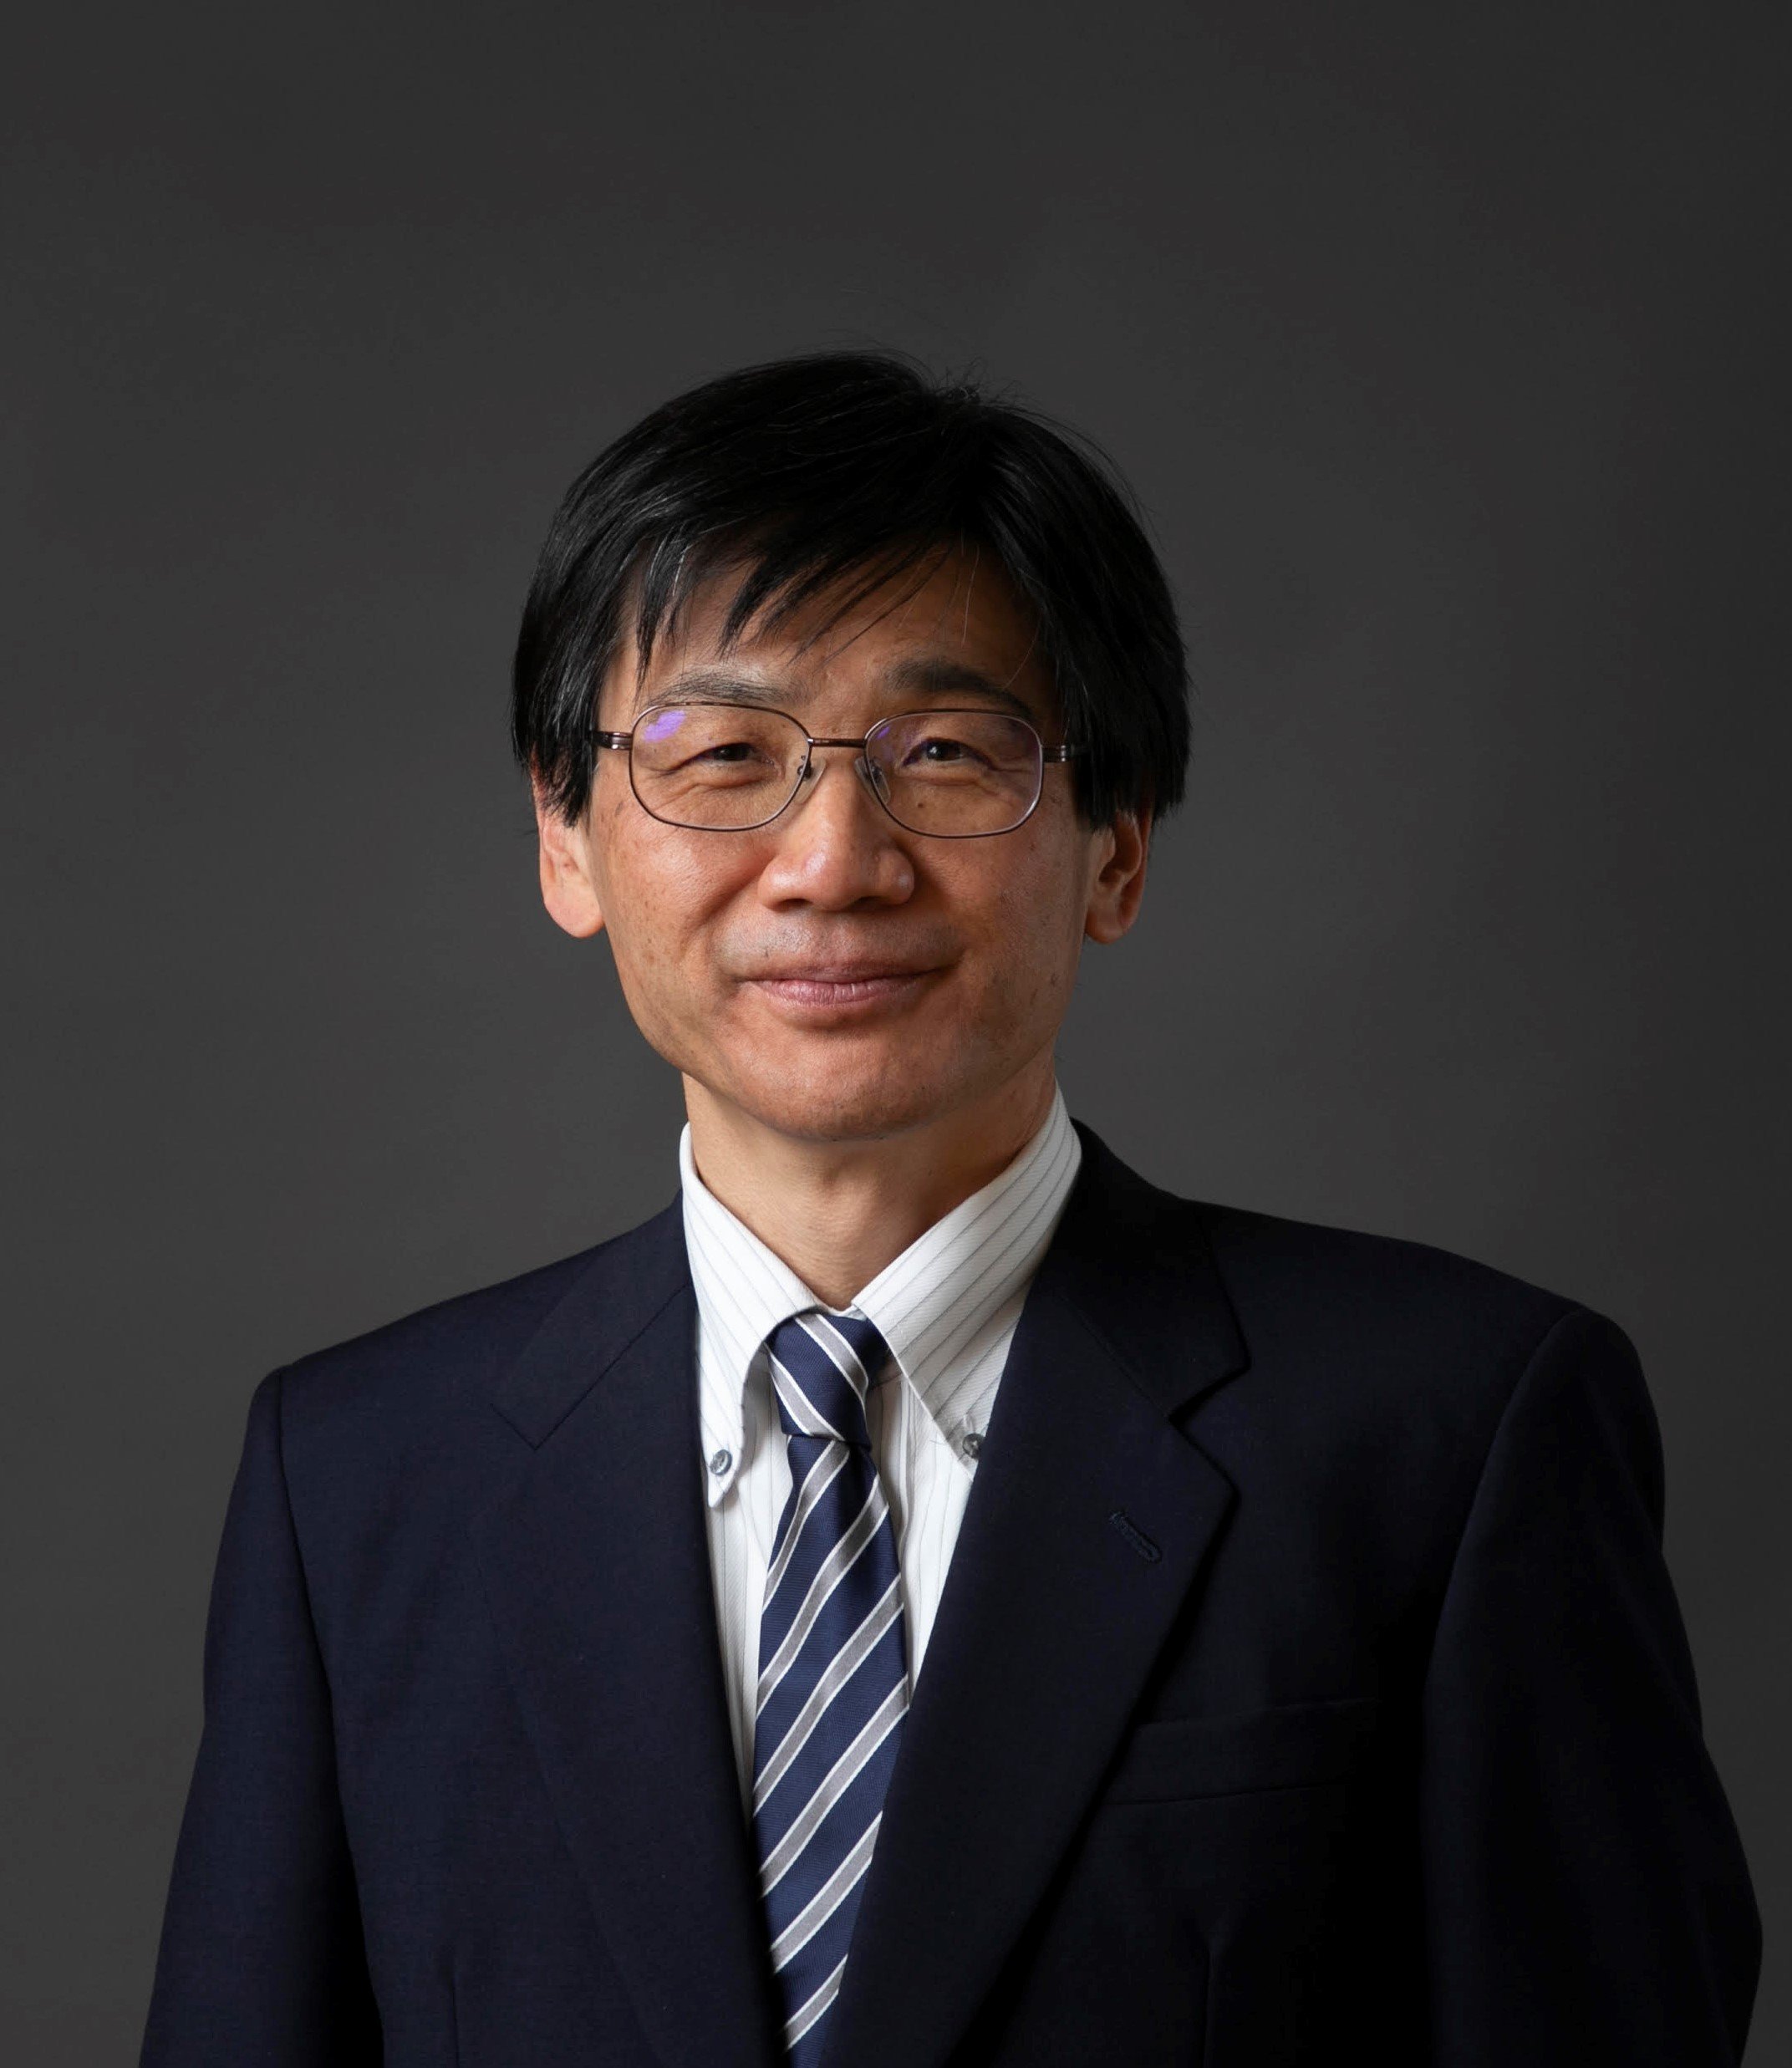  Takeshi SAITO   Dean of the Graduate School of Mathematical Sciences, The University of Tokyo